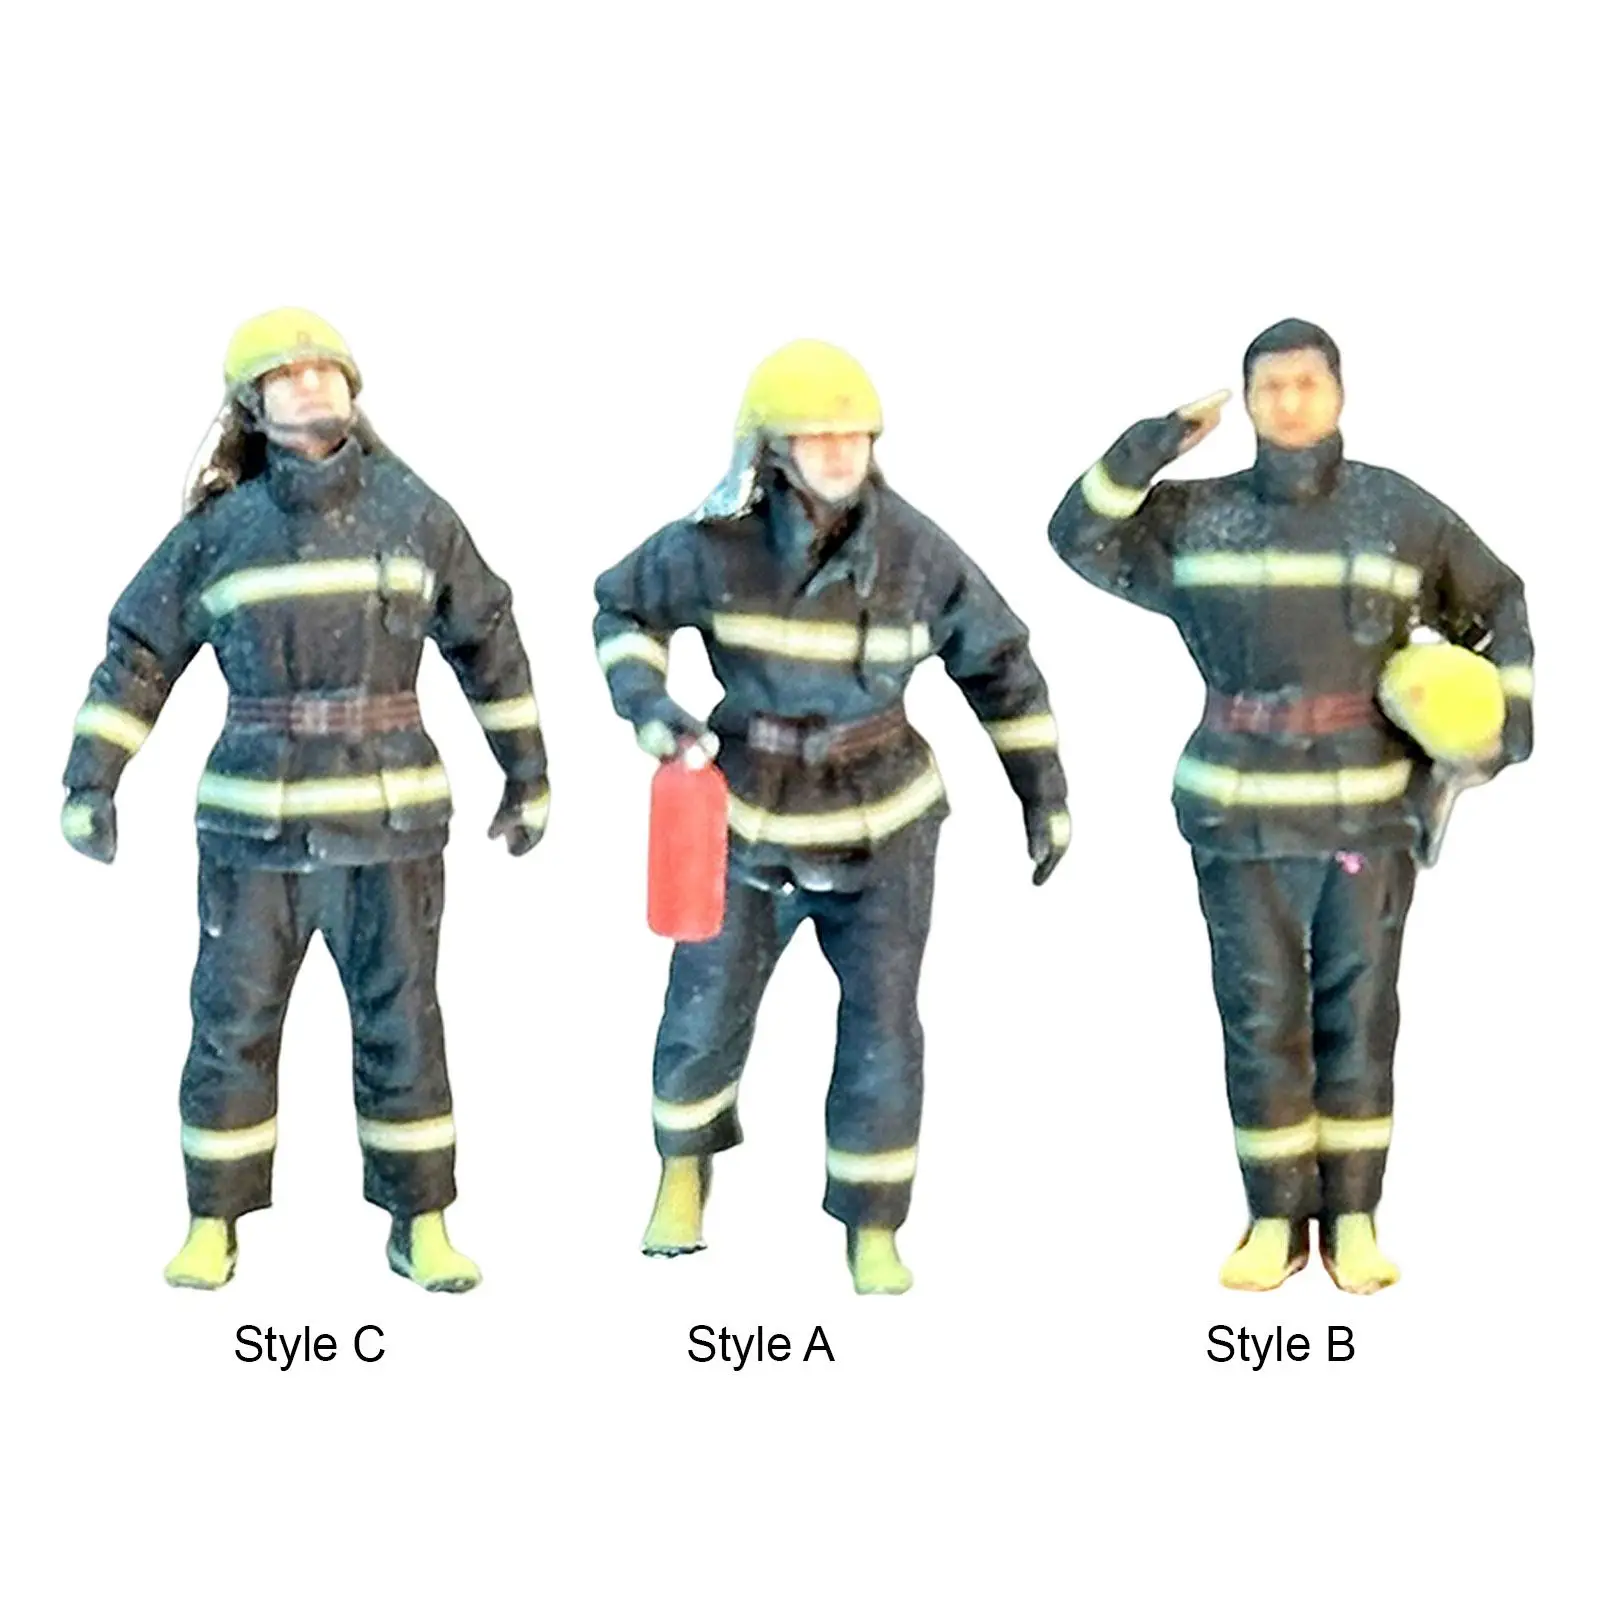 1/64 Scale Firefighter Model Collectibles Tiny People Model for Building Scenery Landscape Diorama Photography Props Layout